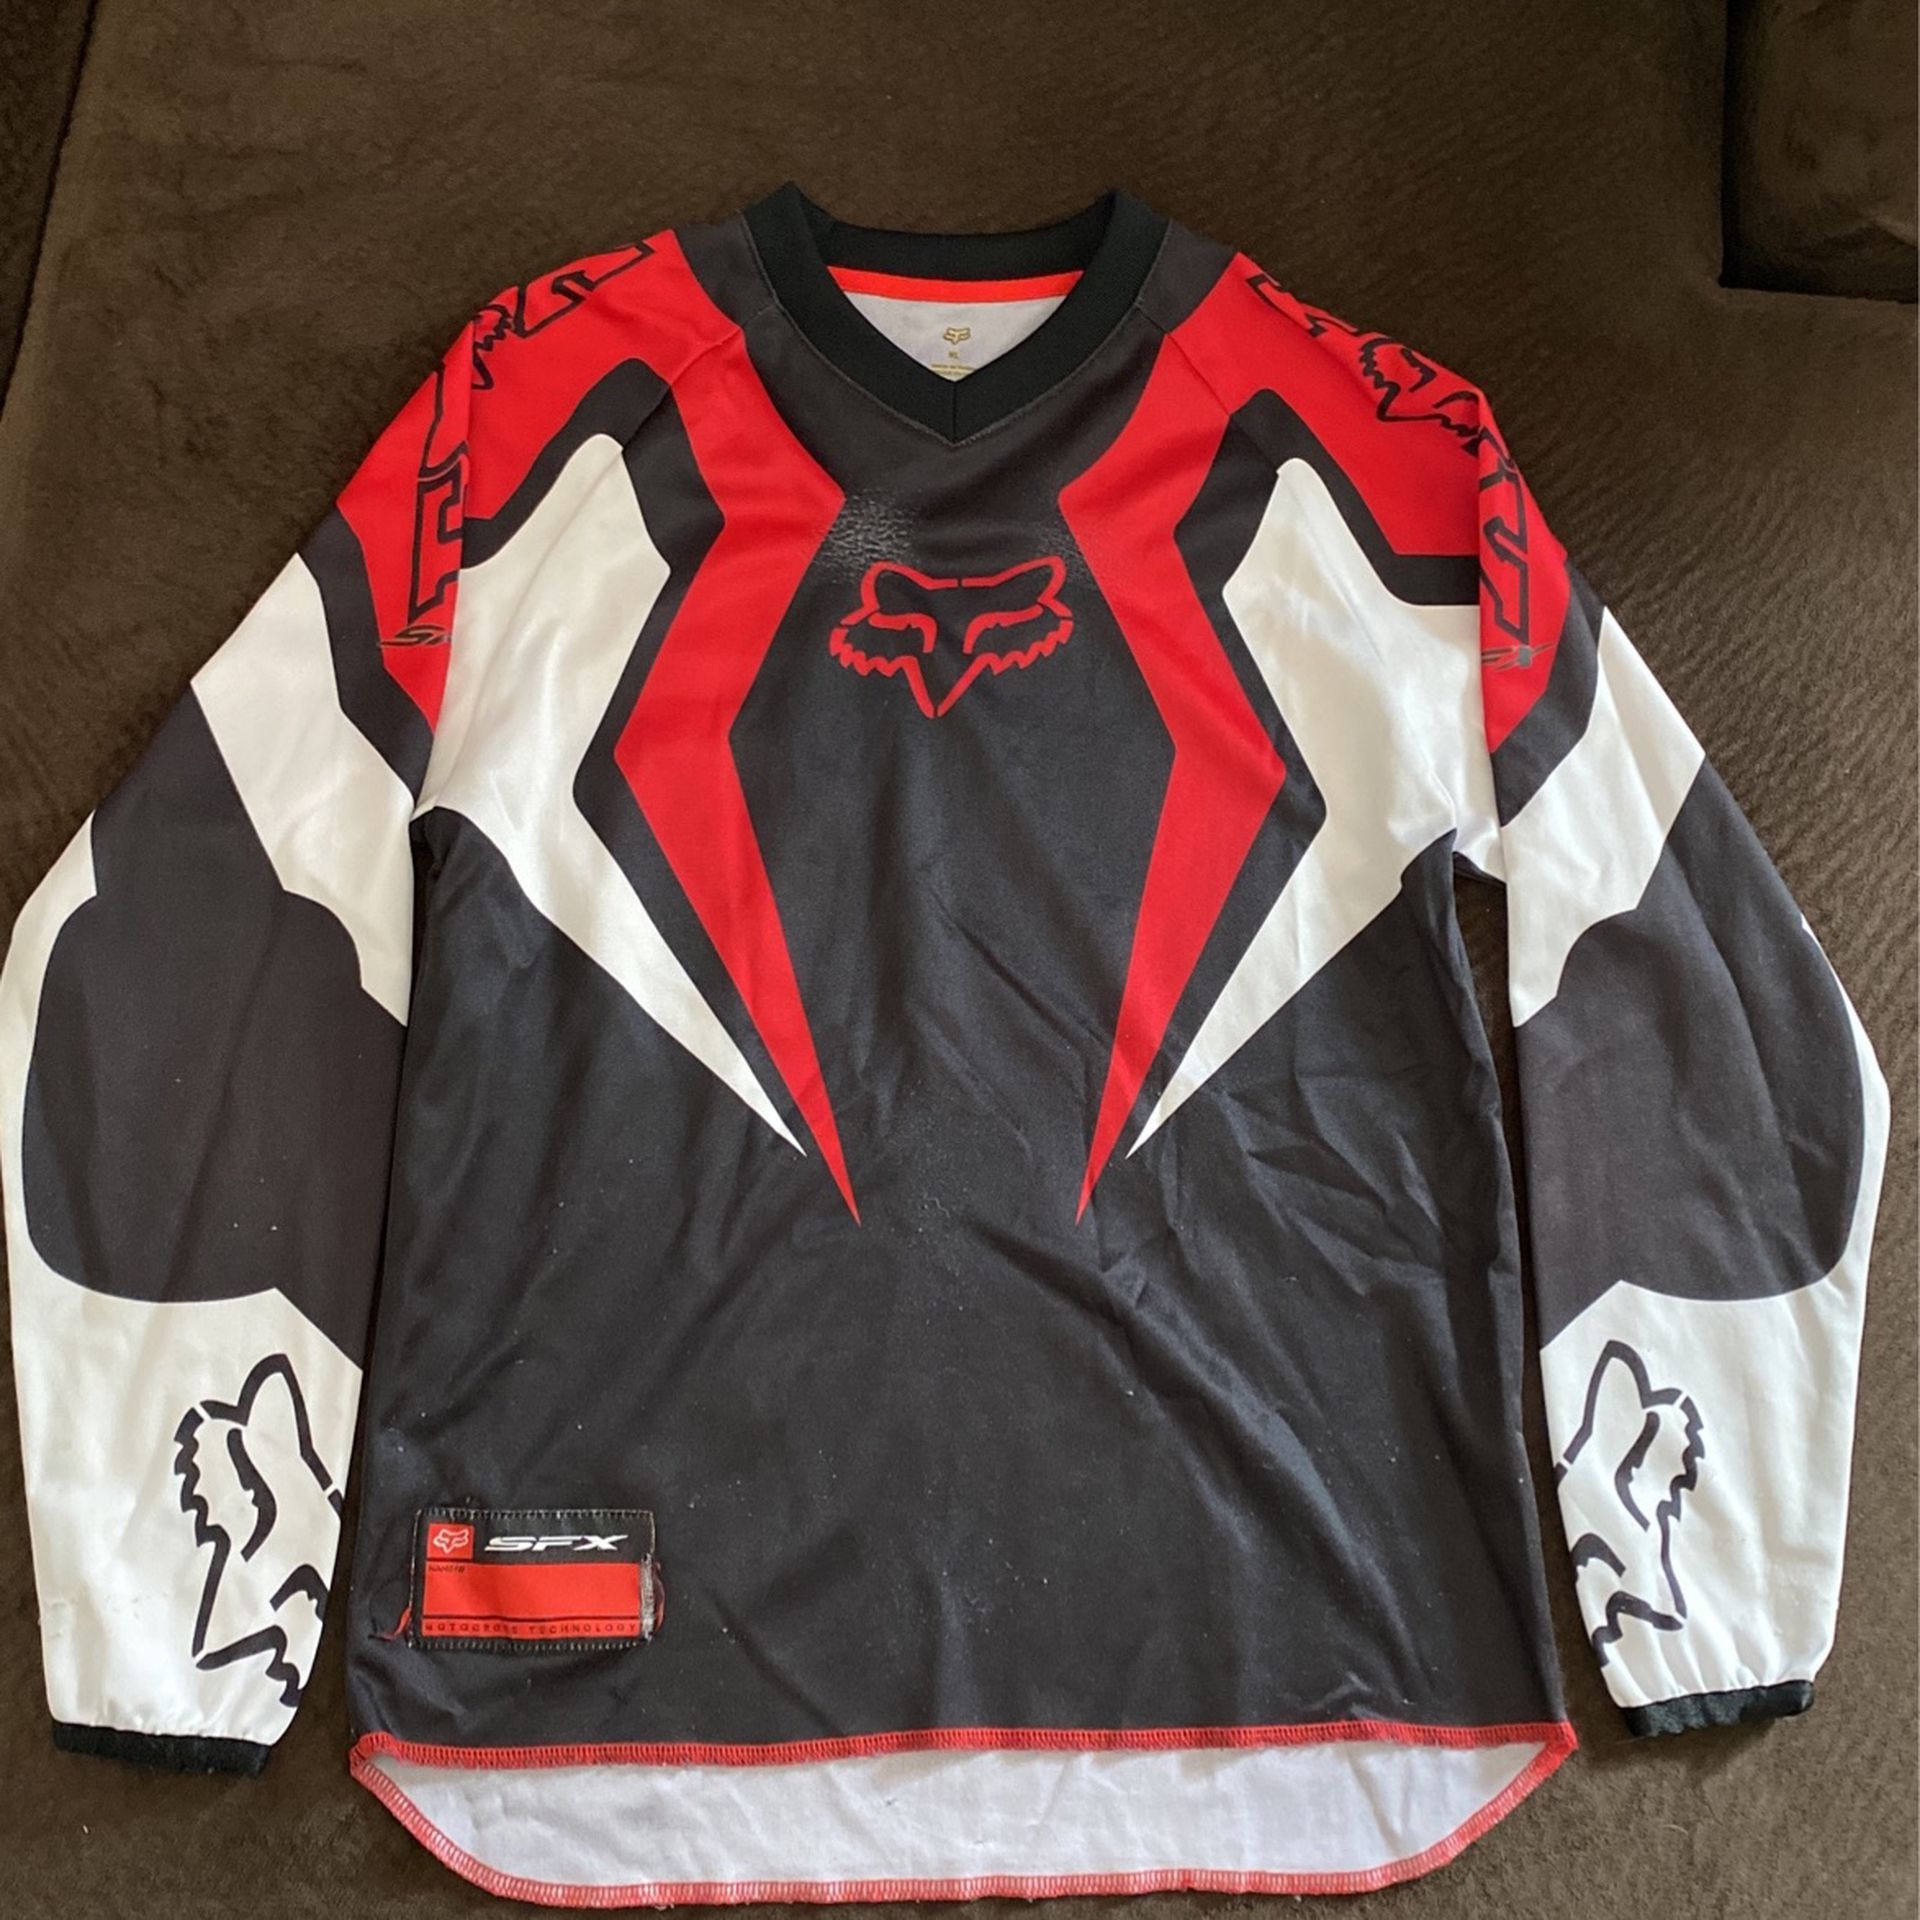 Youth Large Fox Riding Jersey